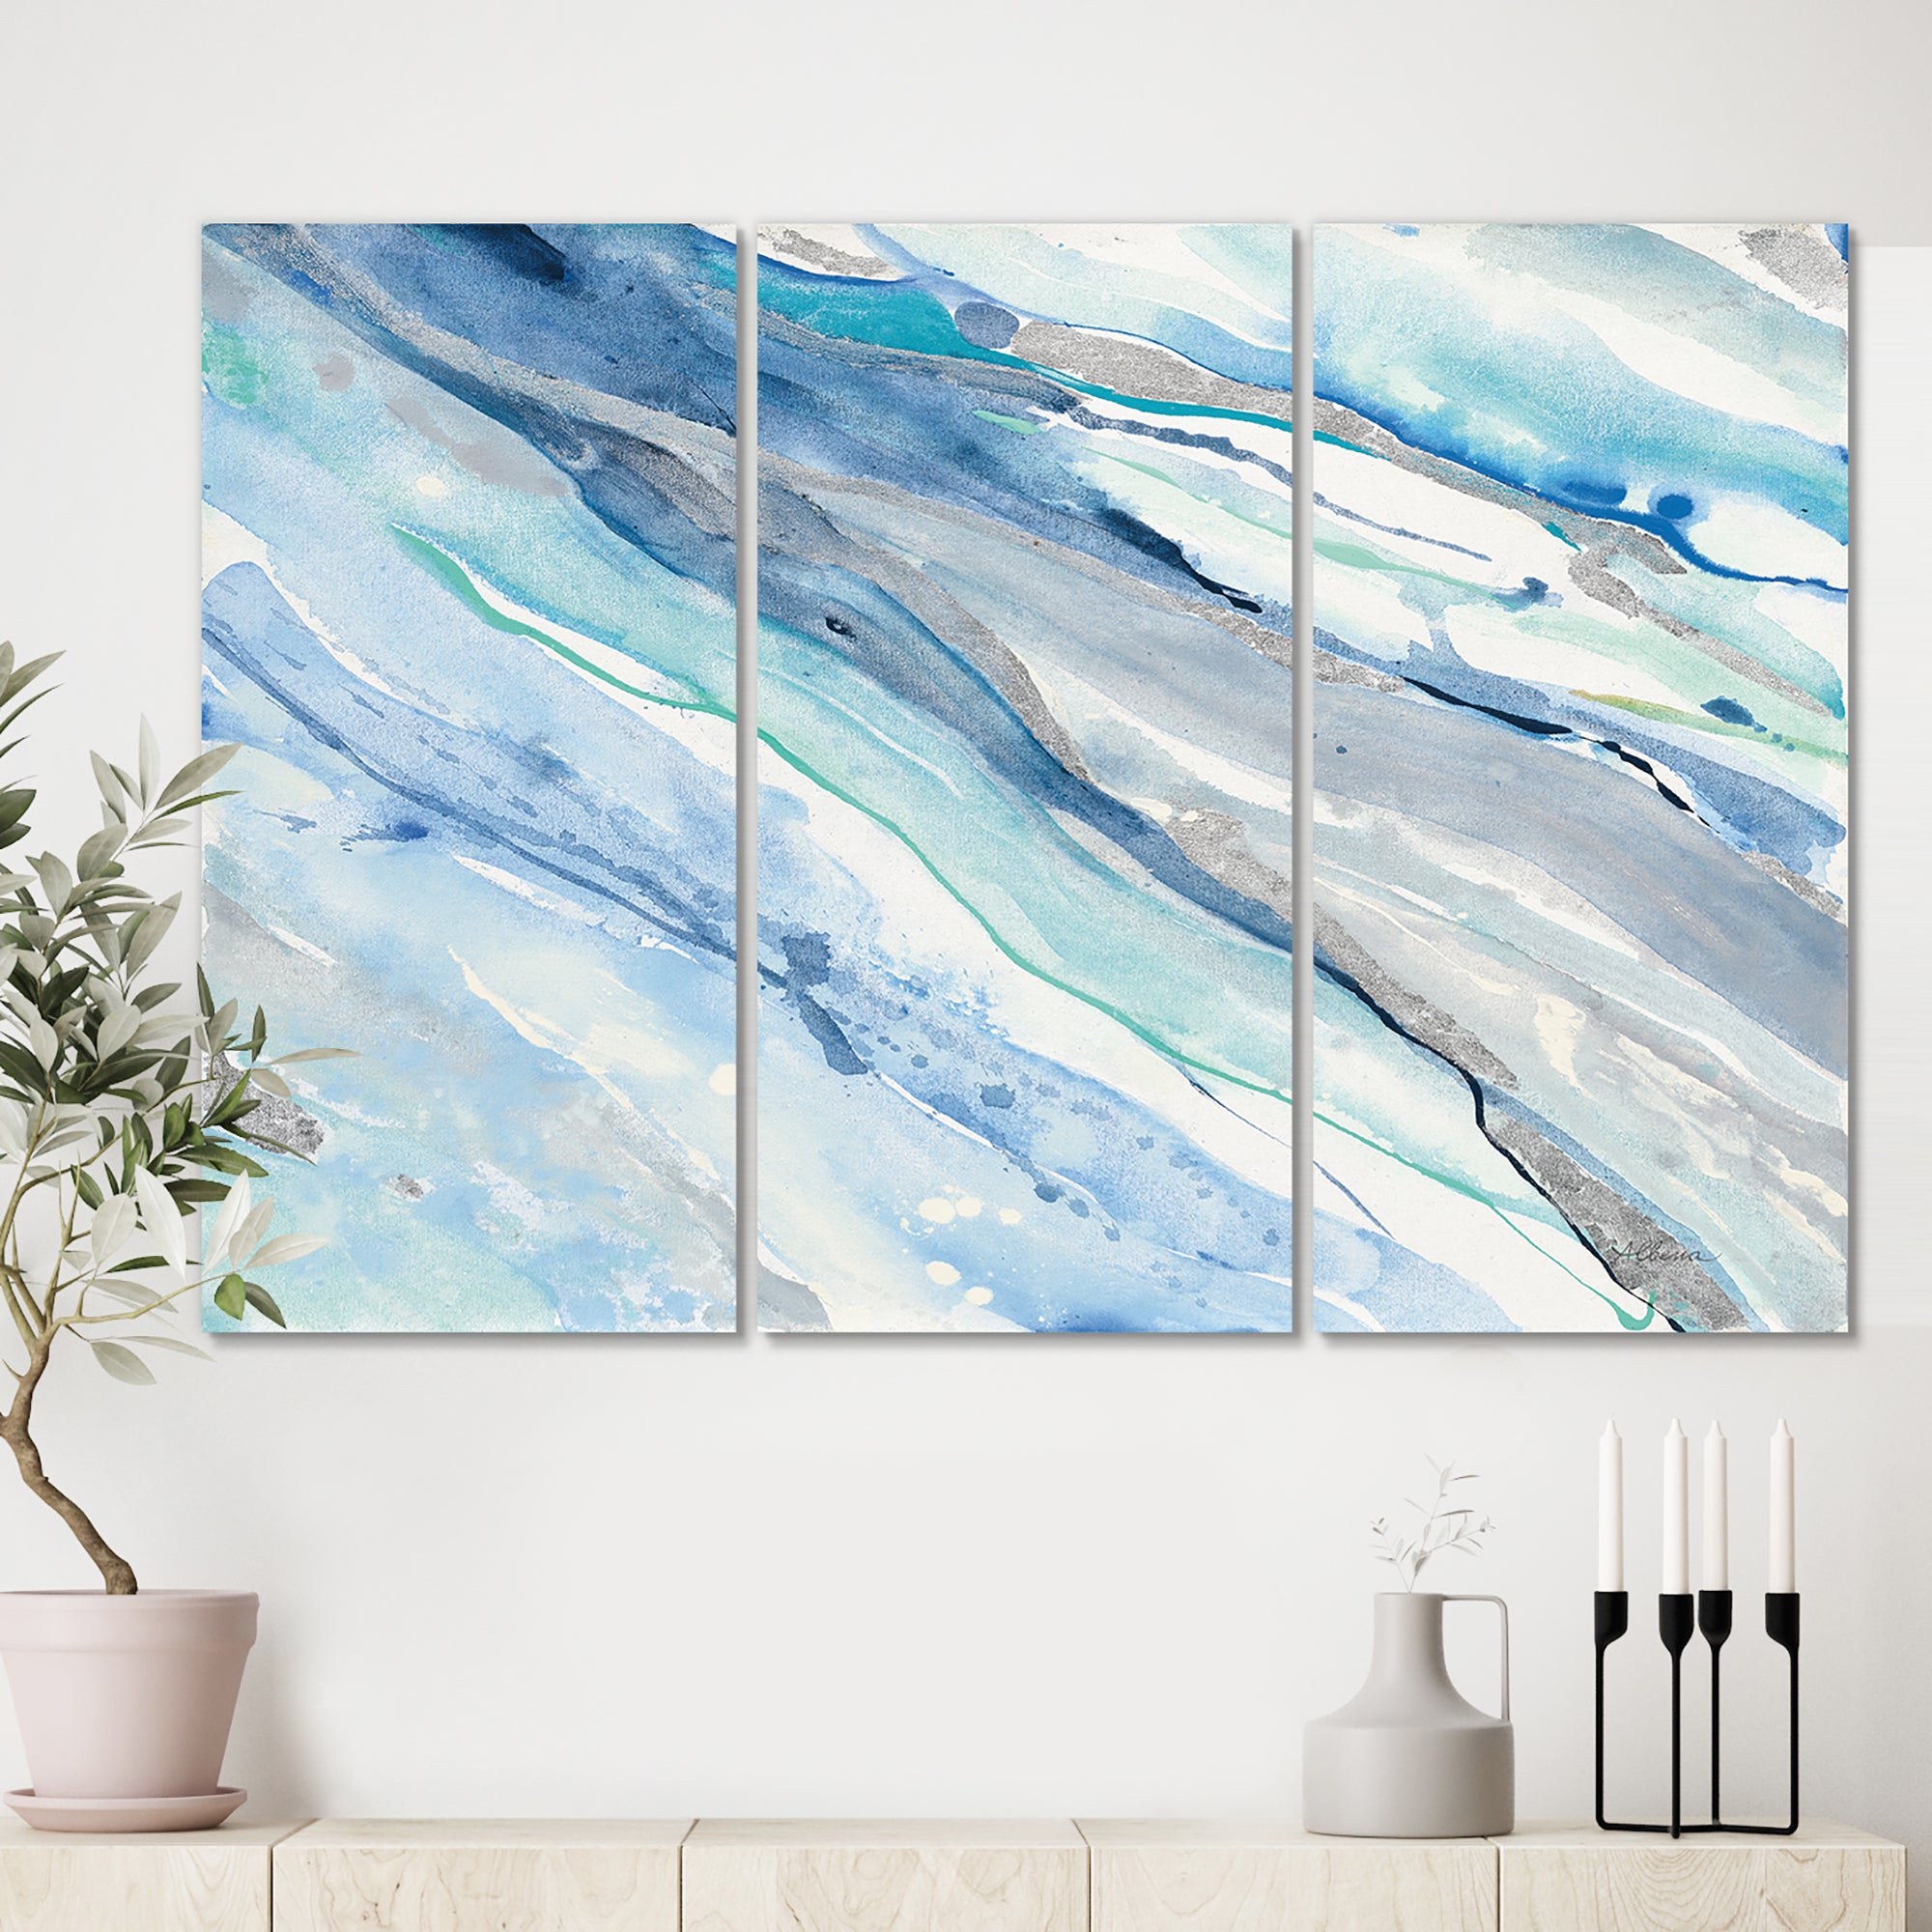 Designart 'Blue Silver Spring II' Modern Lake House Gallery-wrapped Canvas - 36x28 - 3 Panels